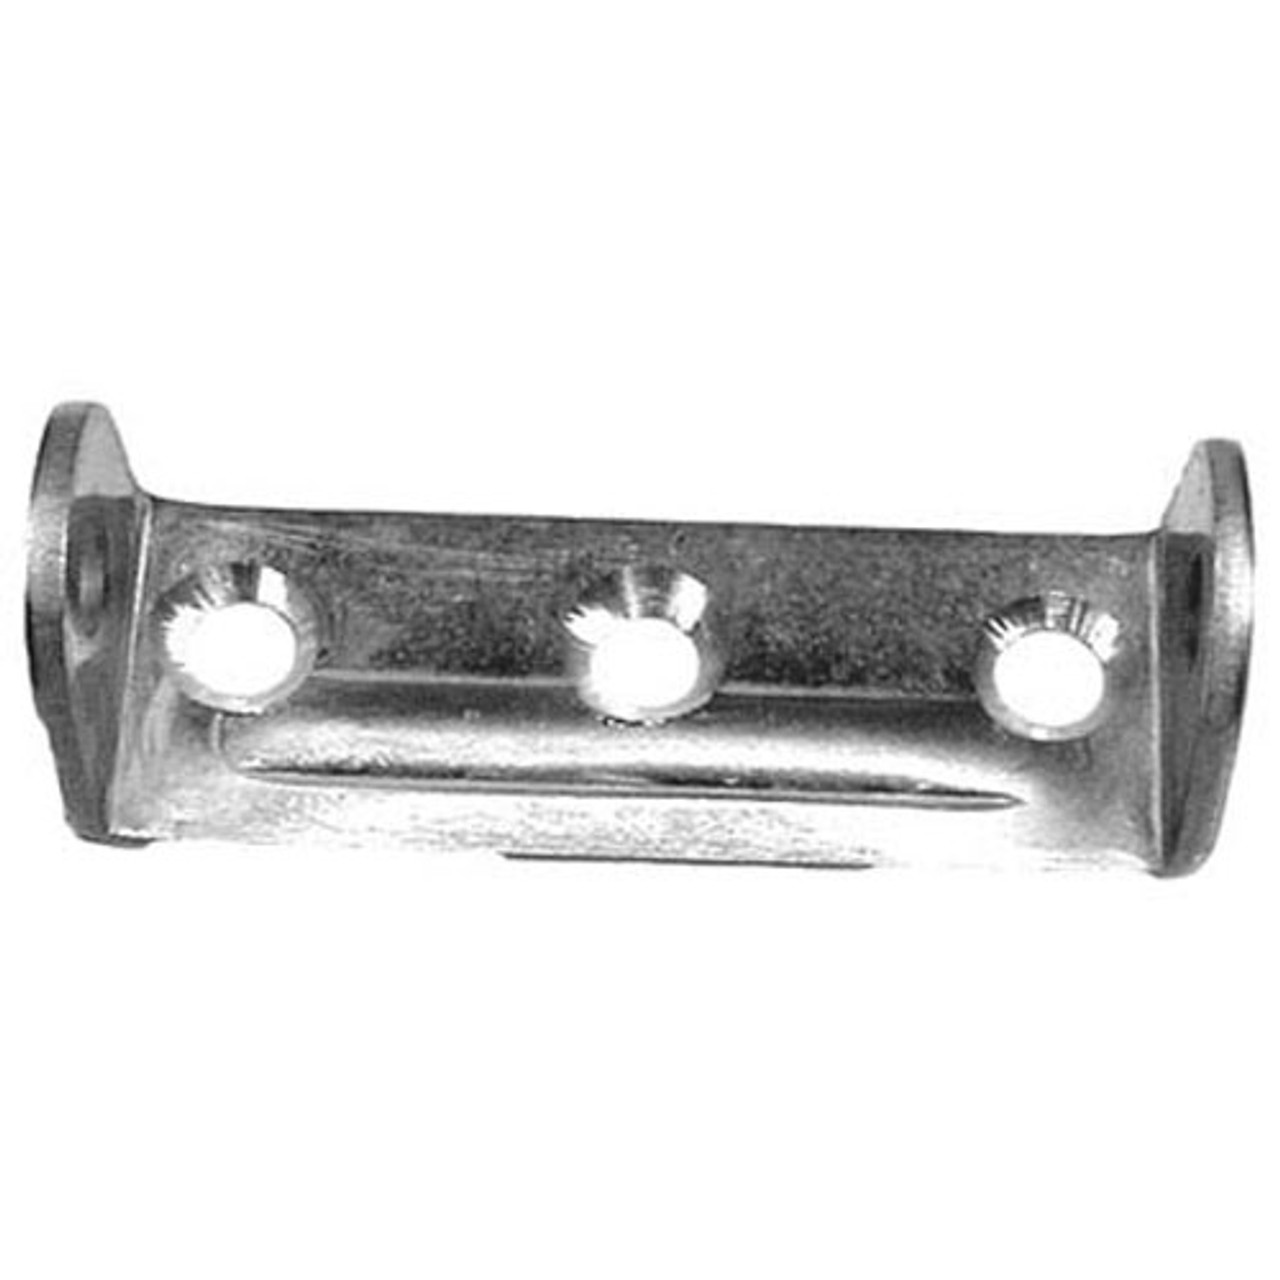 Hinge Base - Replacement Part For Seco 0739360